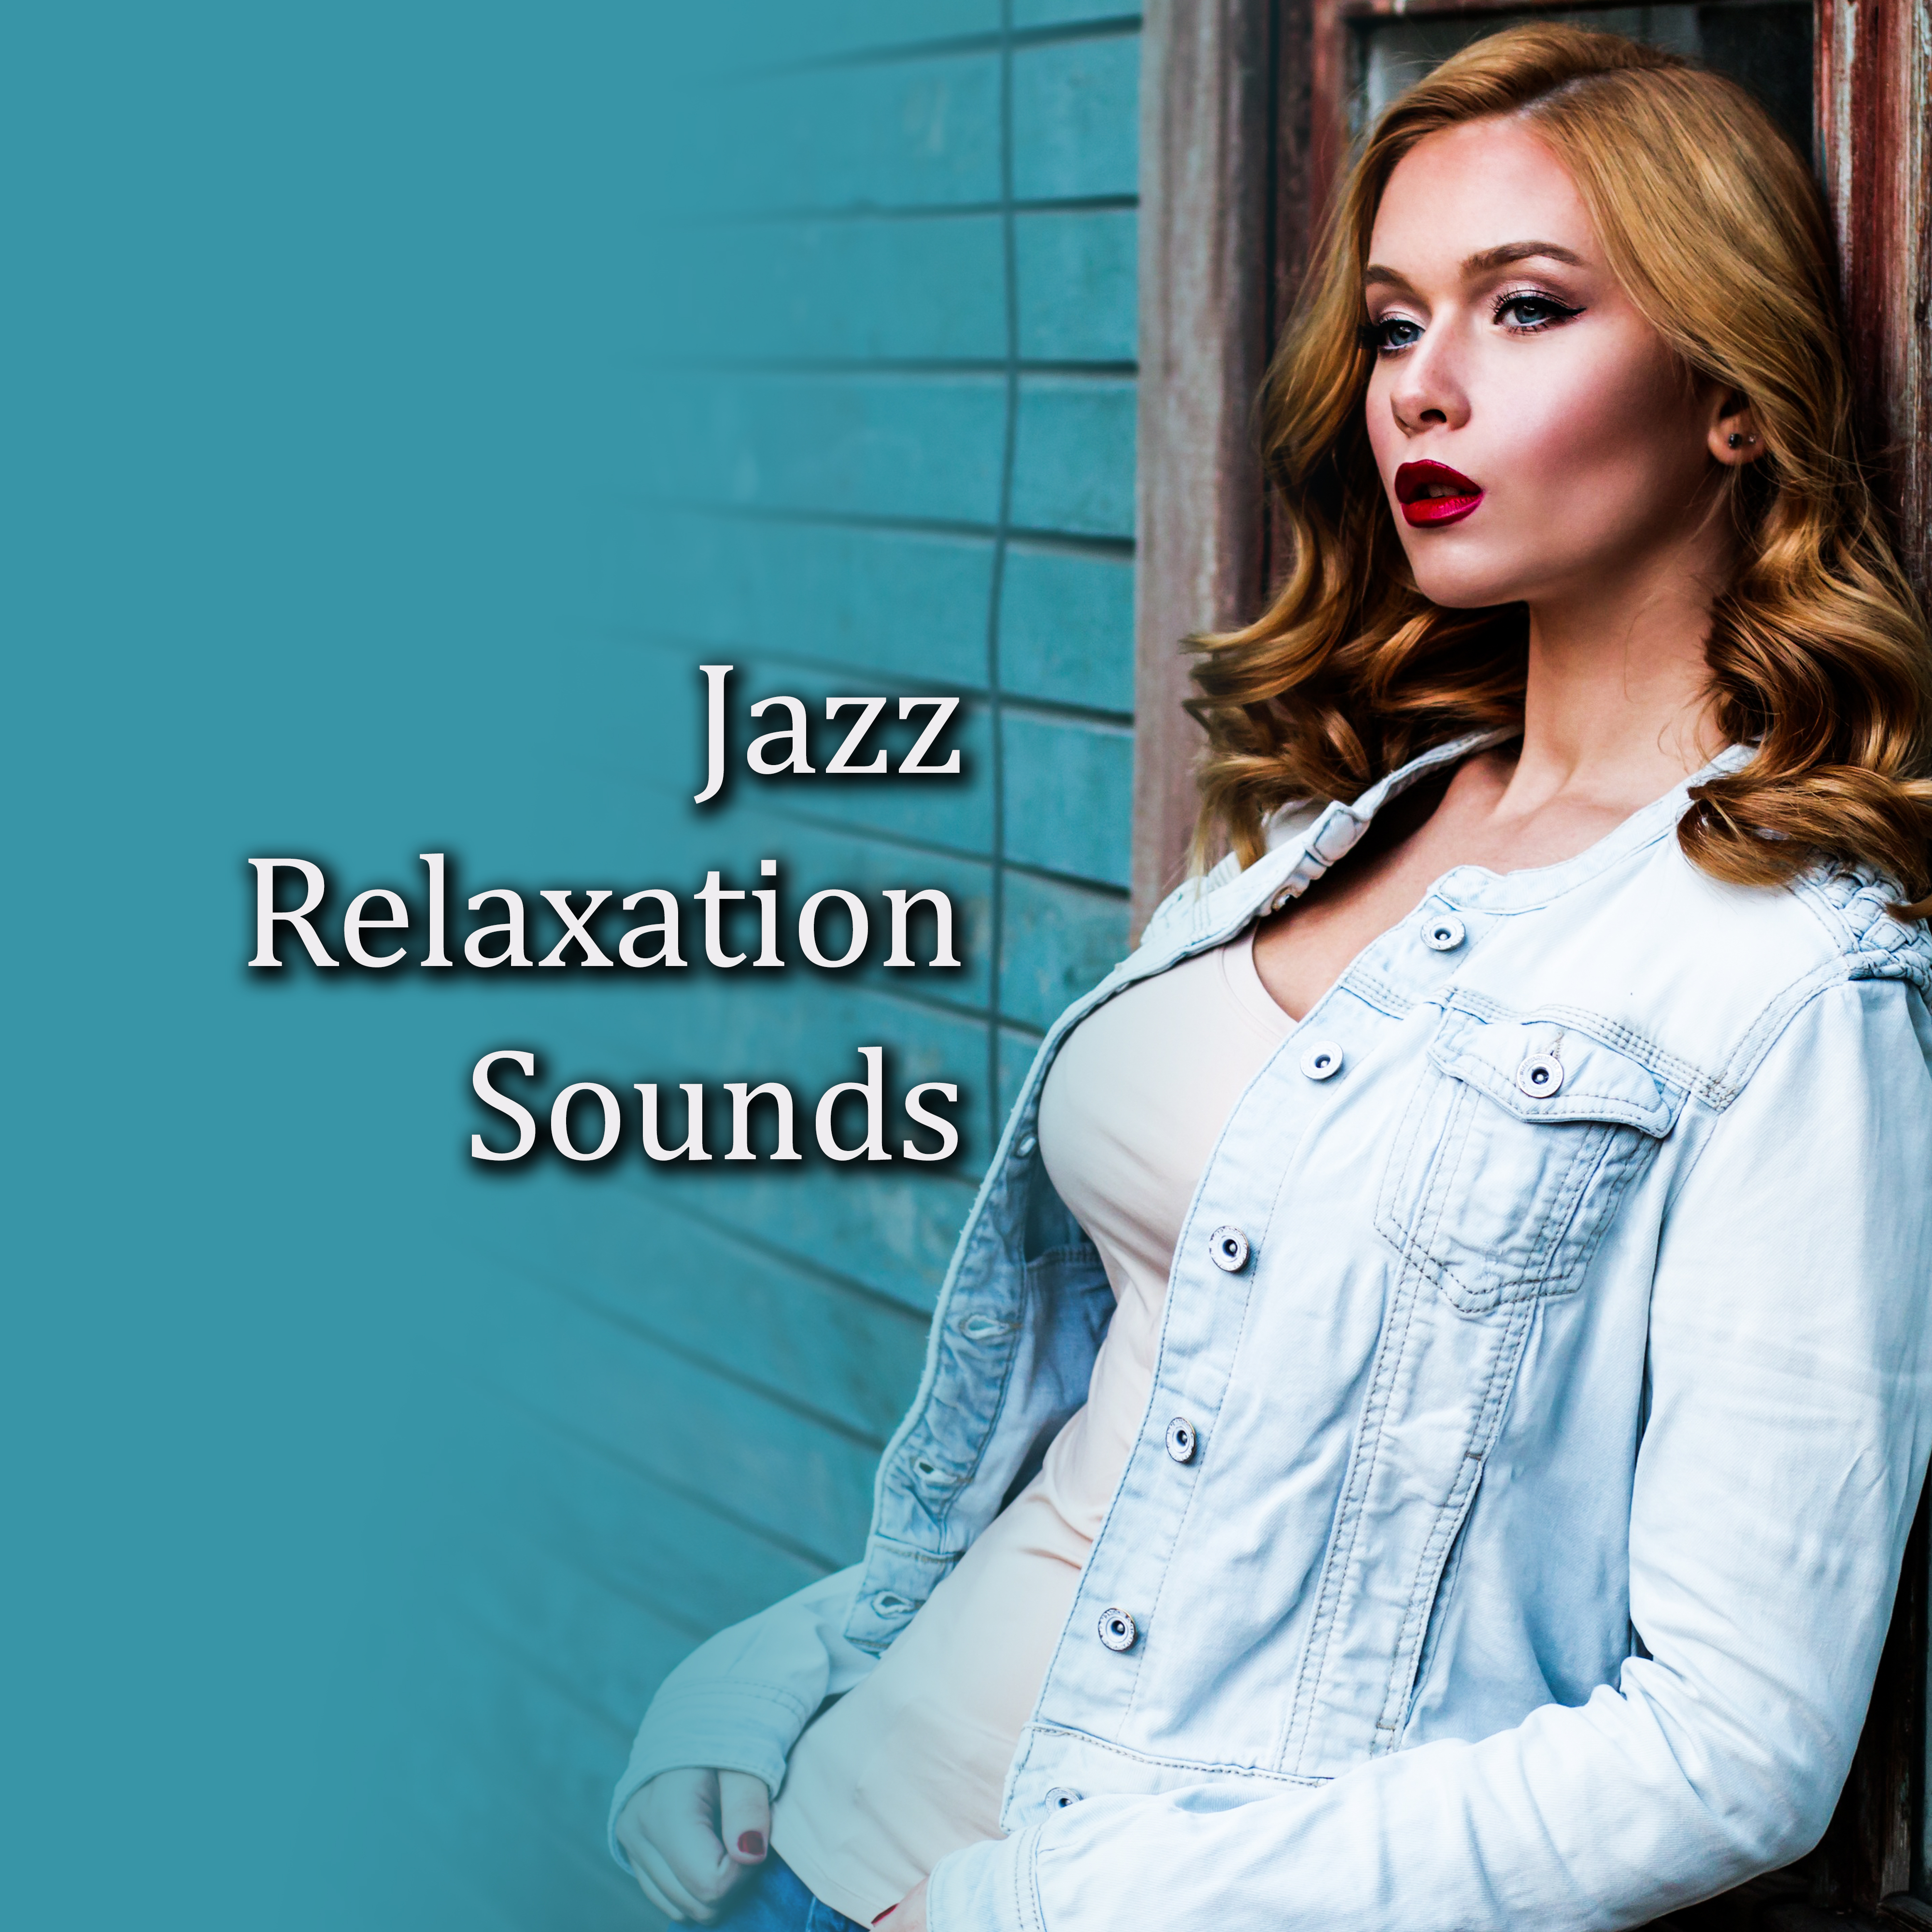 Jazz Relaxation Sounds  Smooth Jazz to Relax, Sounds to Rest, Peaceful Piano Music